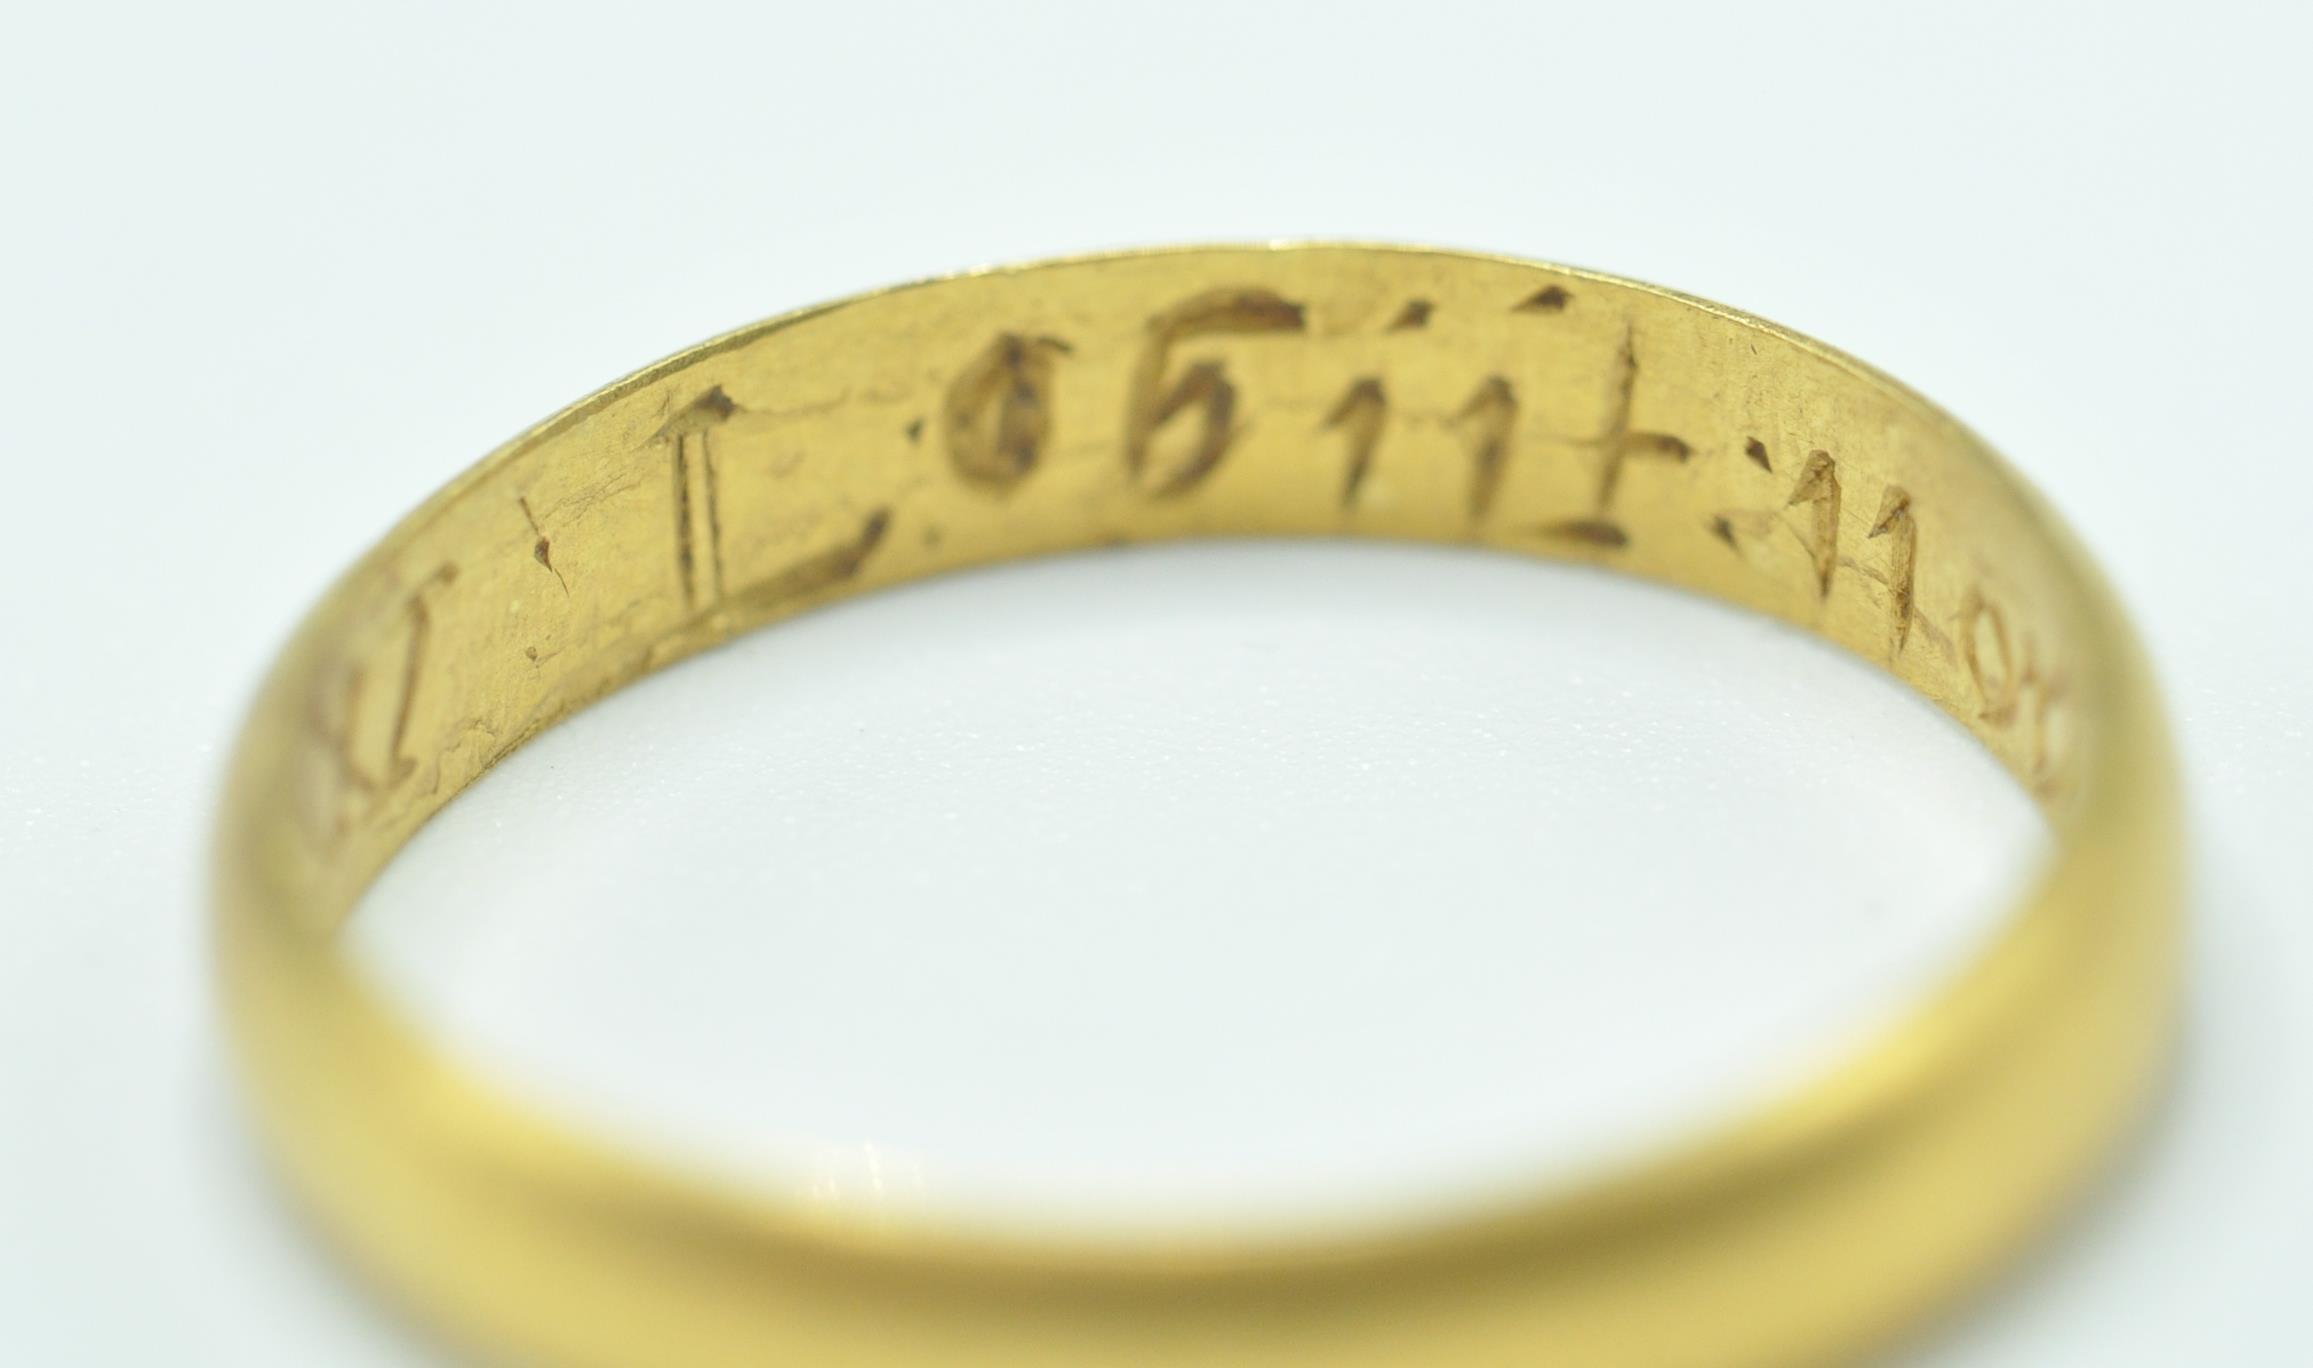 GEORGIAN GOLD MOMENTRO MORI MOURNING RING WITH SKULL - Image 6 of 9